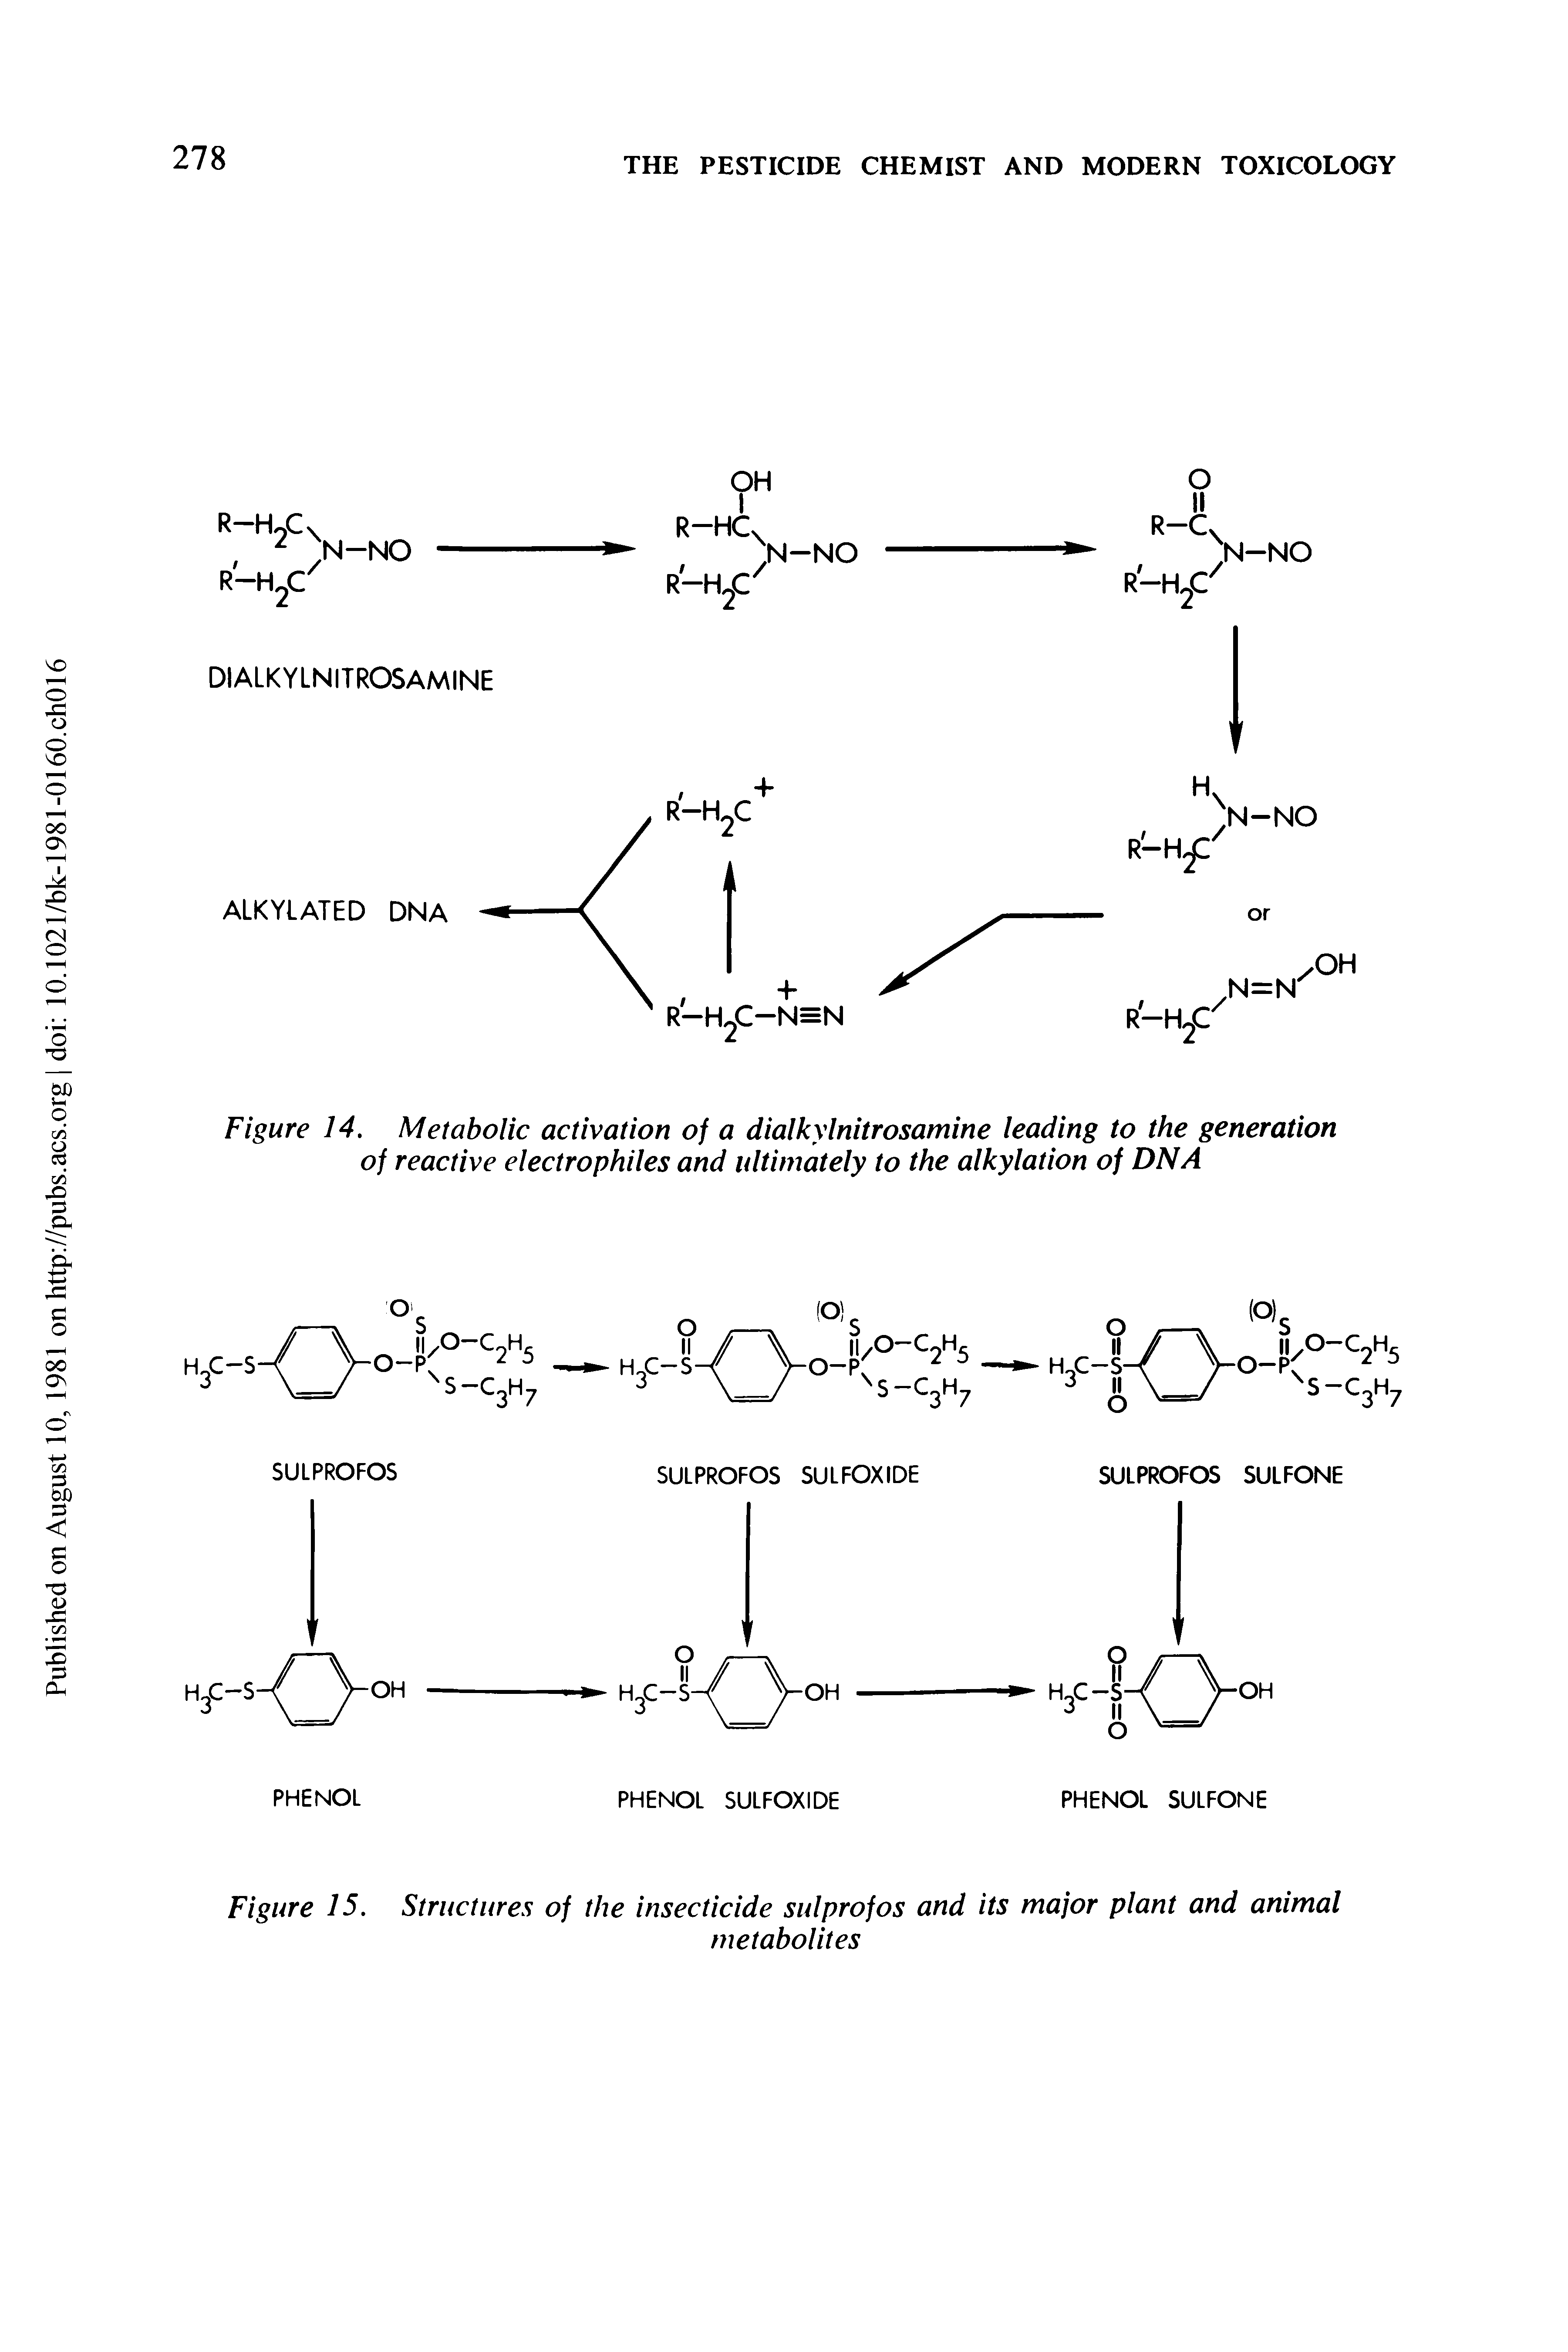 Figure 14. Metabolic activation of a dialkylnitrosamine leading to the generation of reactive electrophiles and ultimately to the alkylation of DNA...